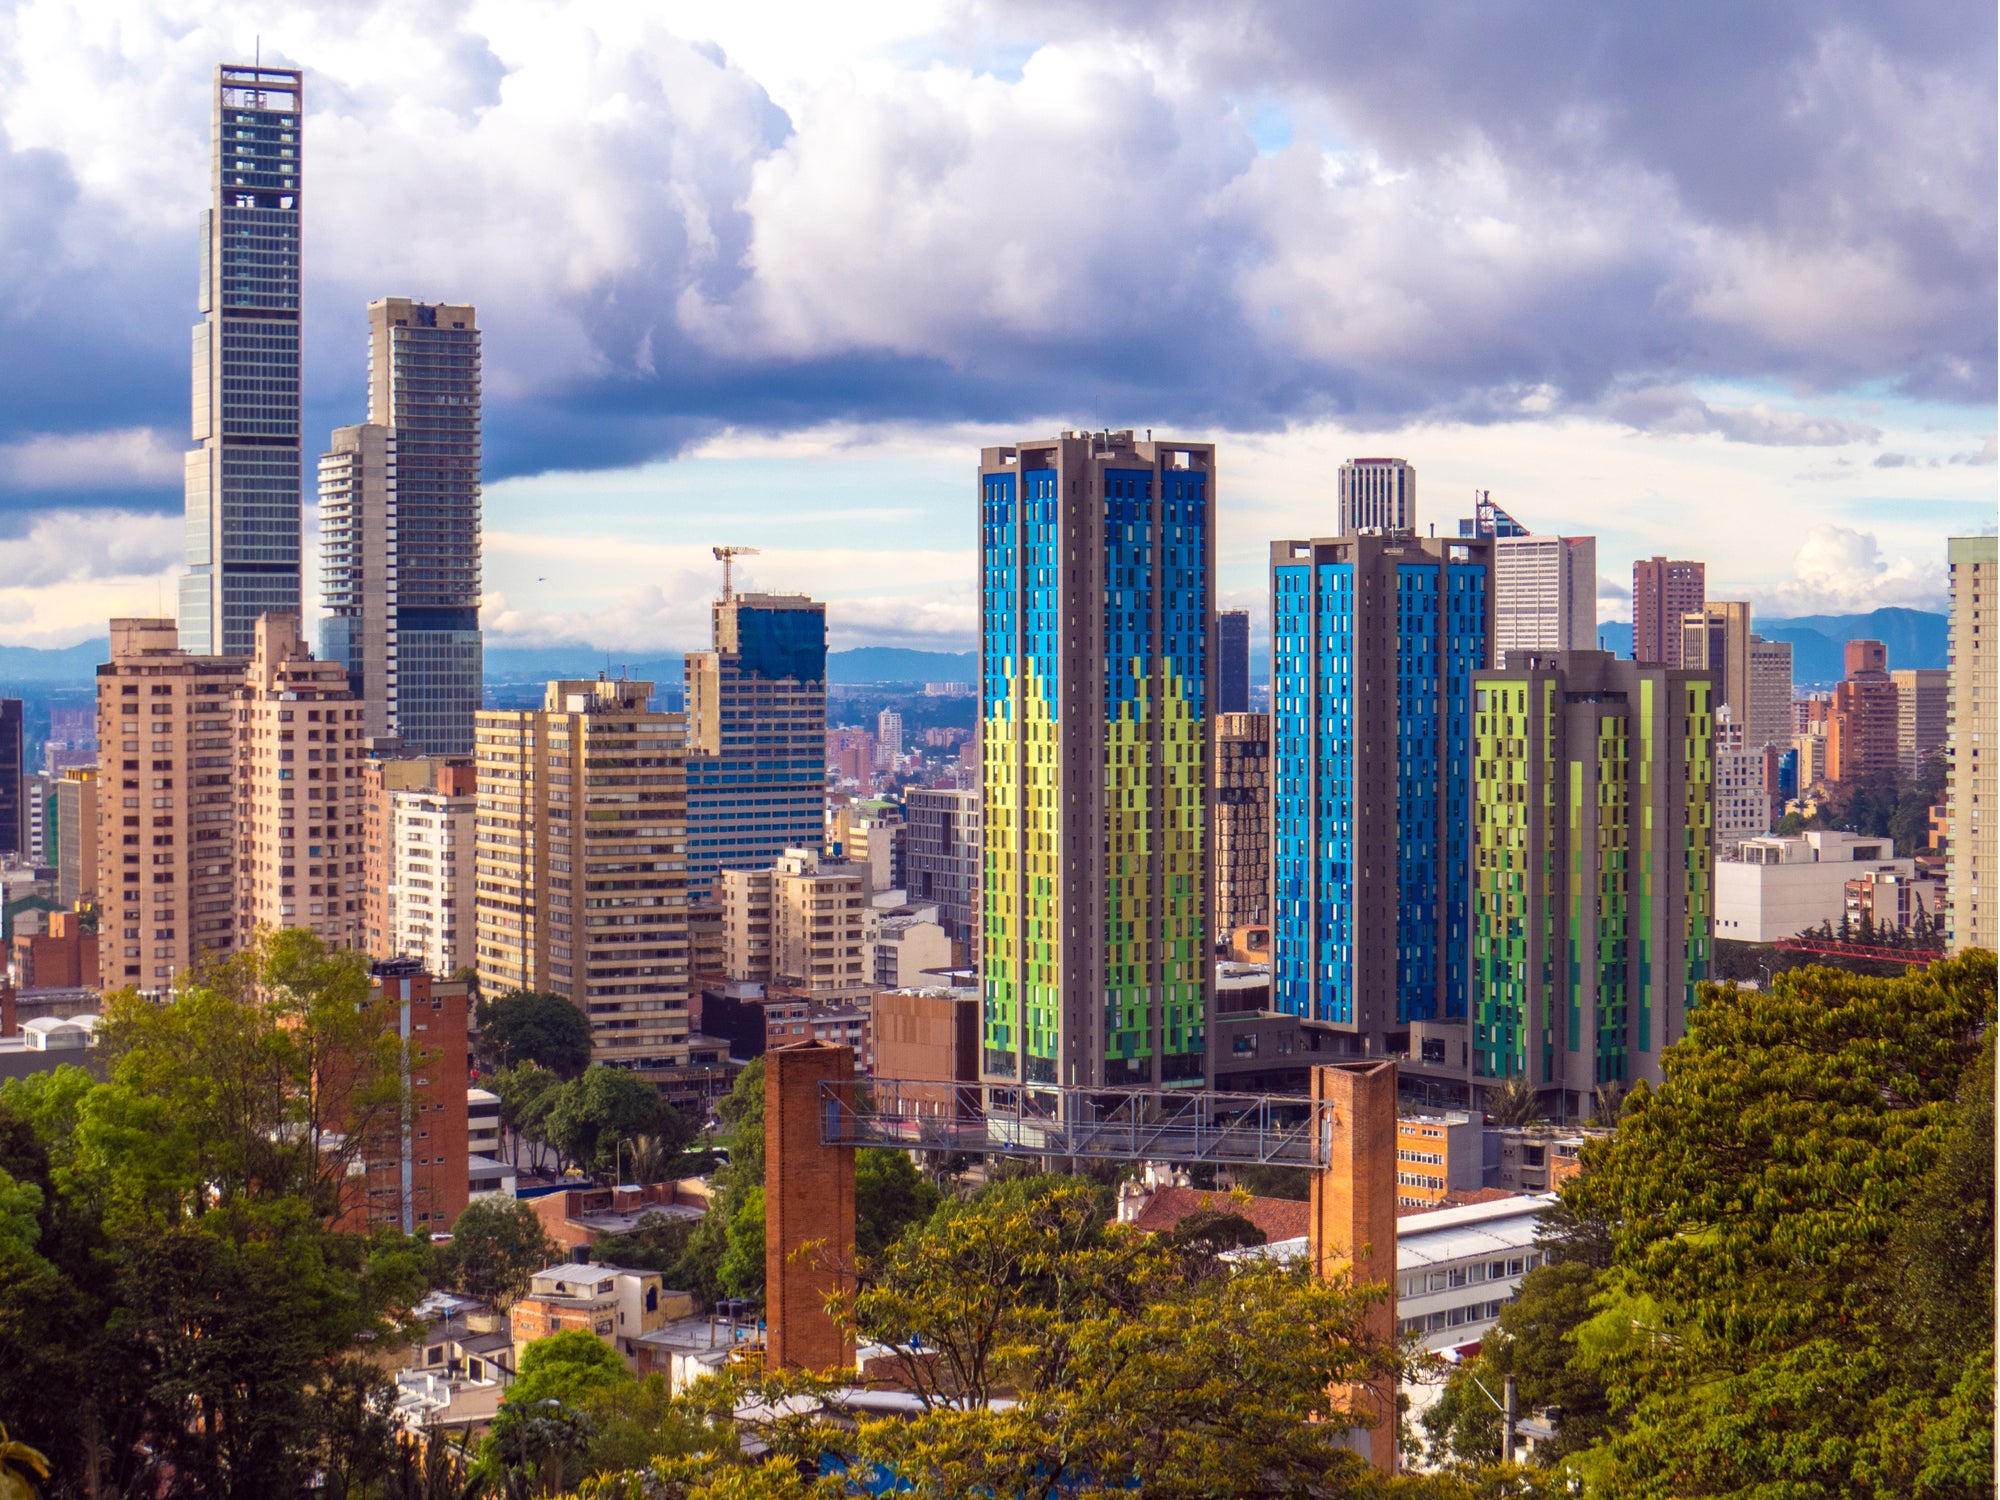 A panoramic view of Bogota – the capital of Colombia